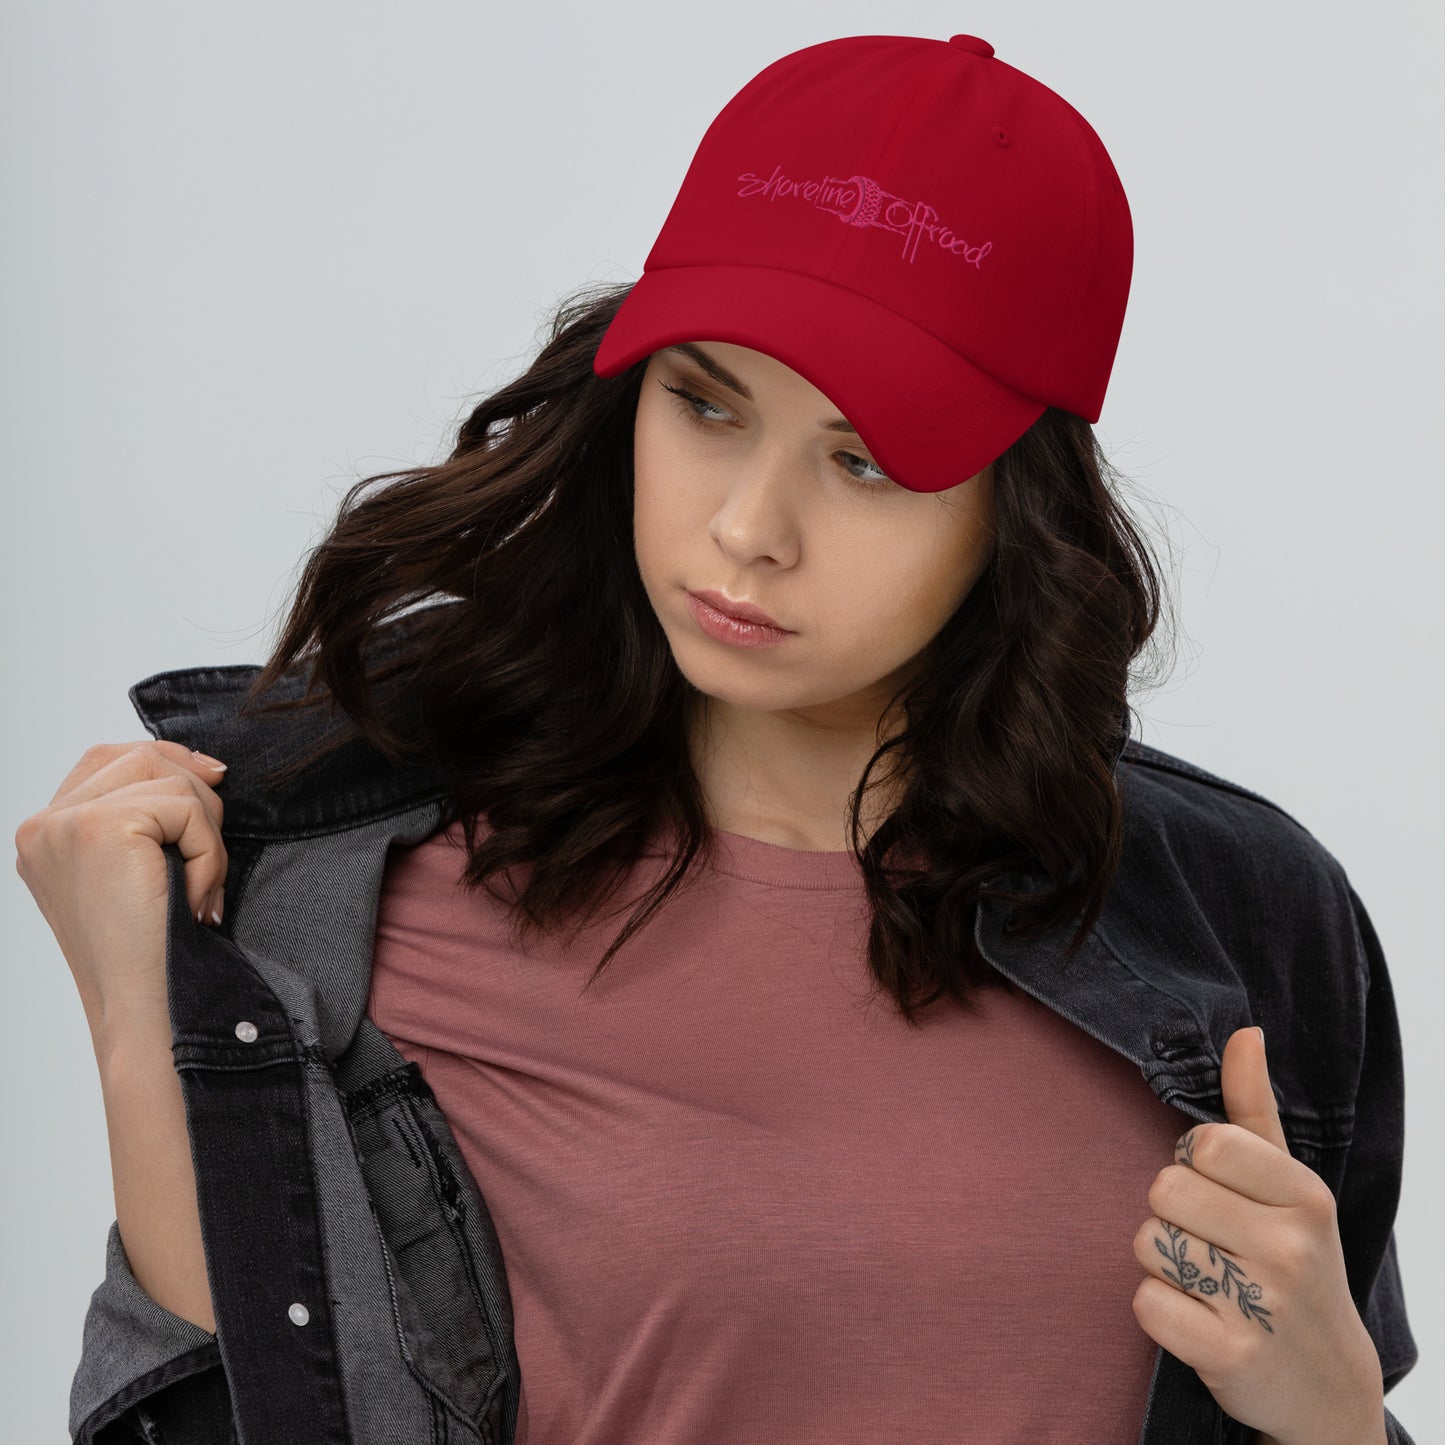 a woman wearing a red hat and jacket